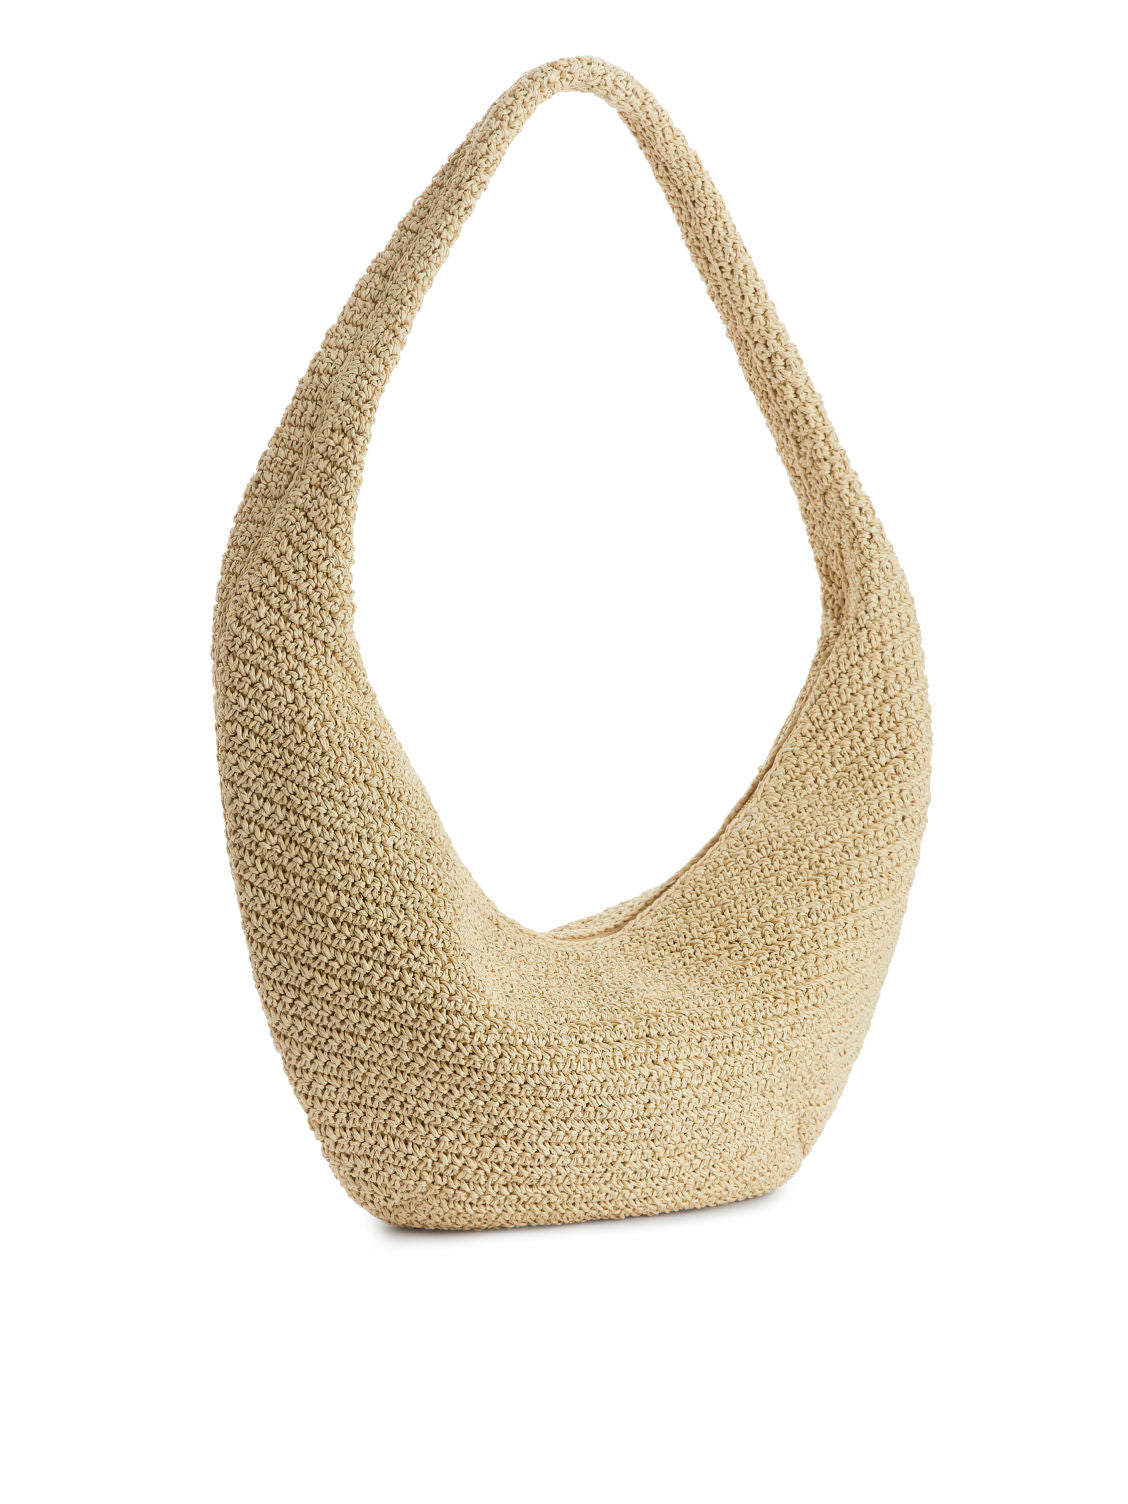 Rounded straw bag